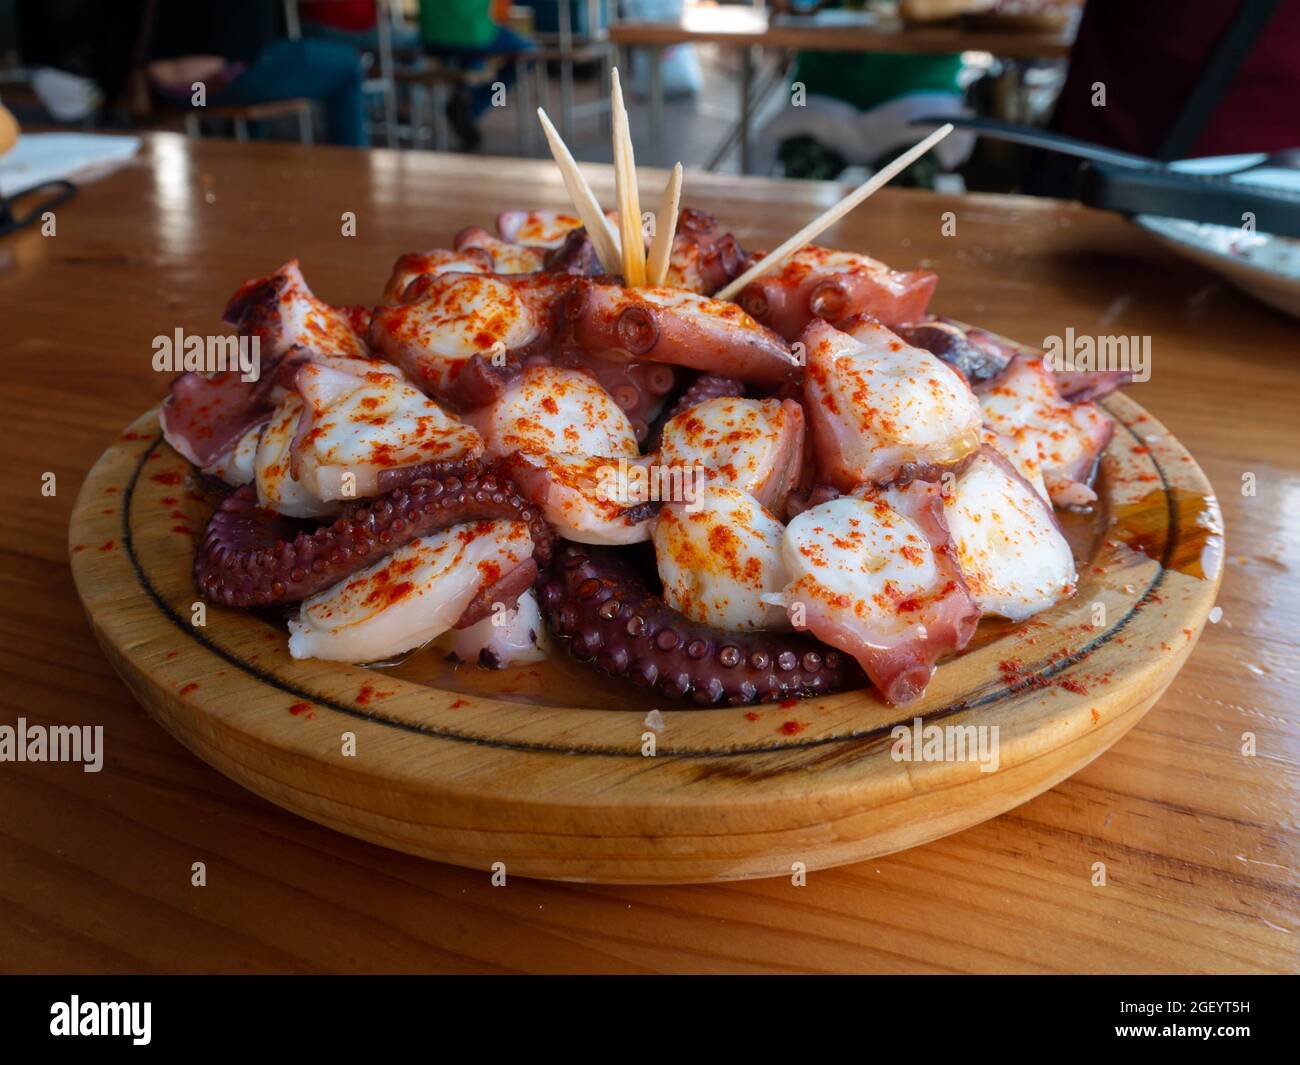 Pulpo a la gallega in Spanish meaning Galician-style octopus  or polbo a feira meaning fair-style octopus in gallego a traditional Galician dish. Stock Photo